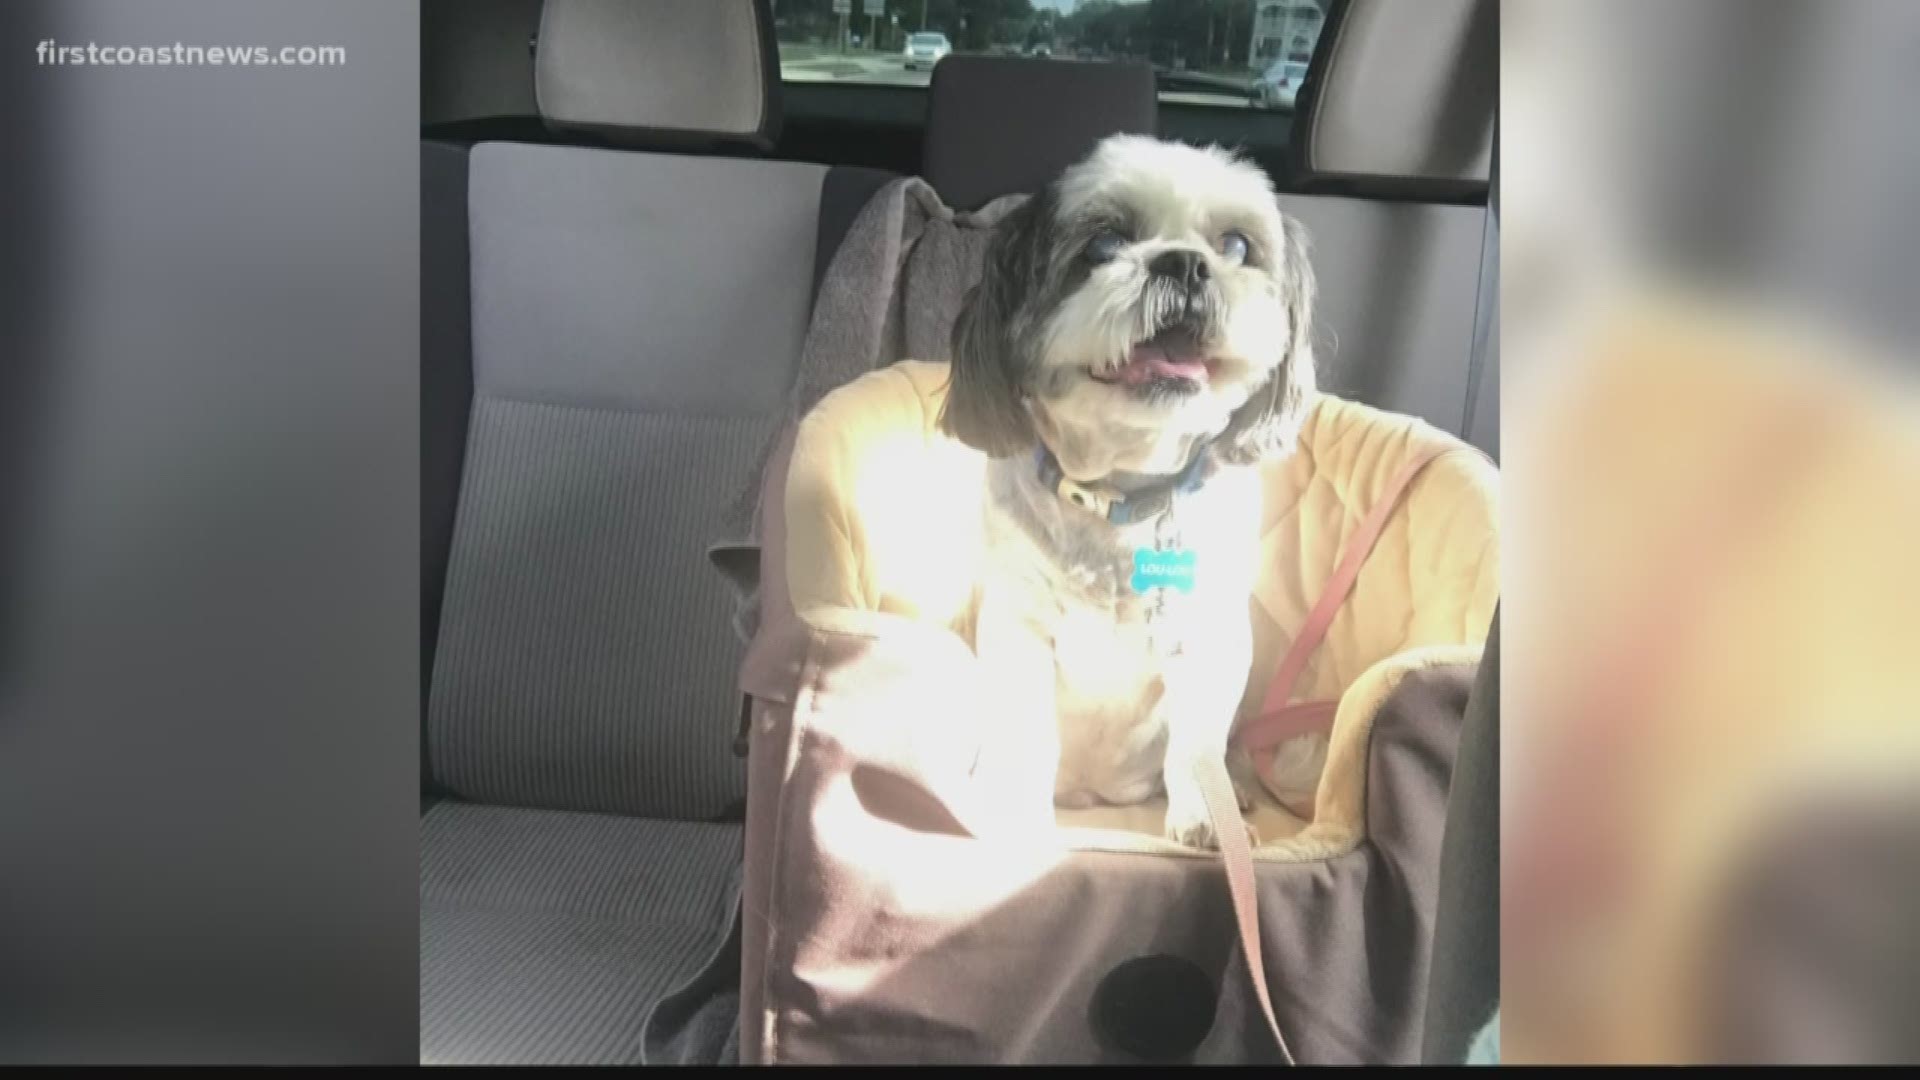 The dog, named Lucious is 15-years-old and blind. The family is grateful to have their furry friend back home.